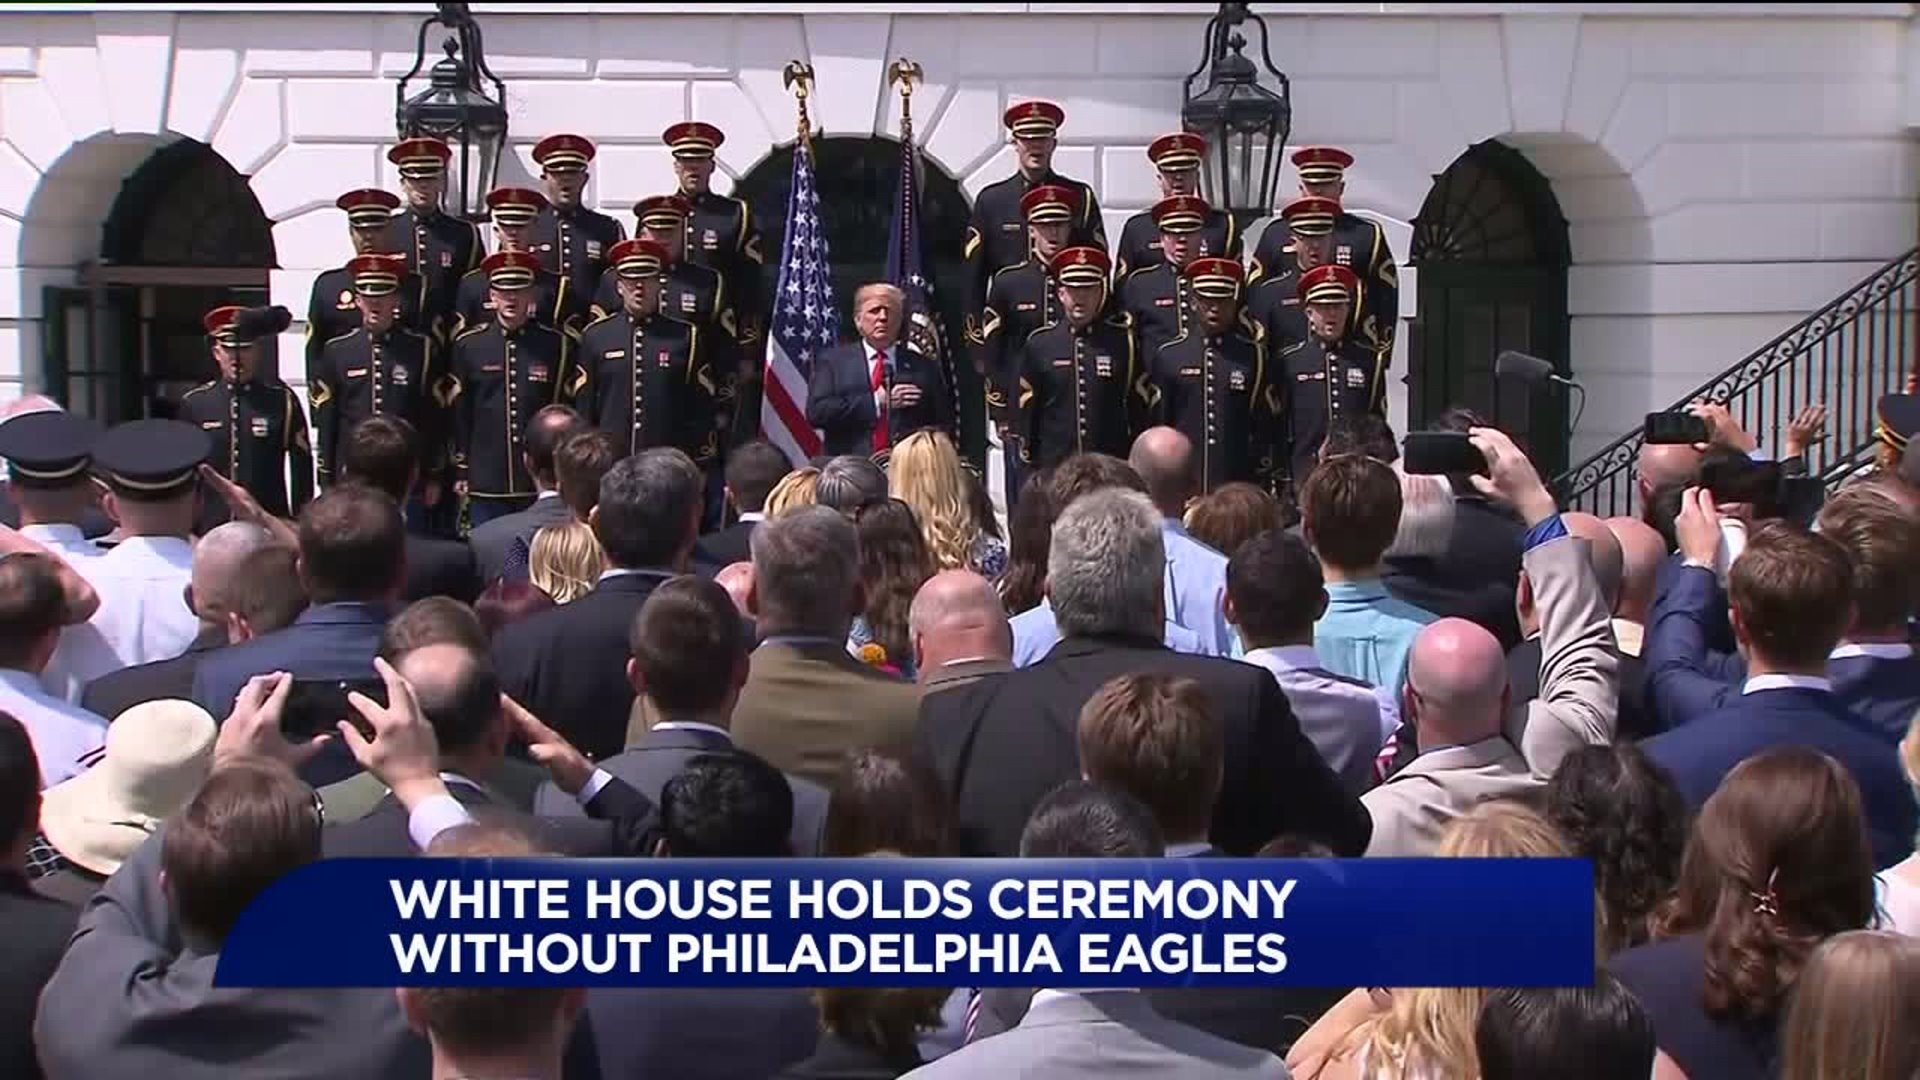 Football Fans Puzzled After Philadelphia Eagles Uninvited to White House